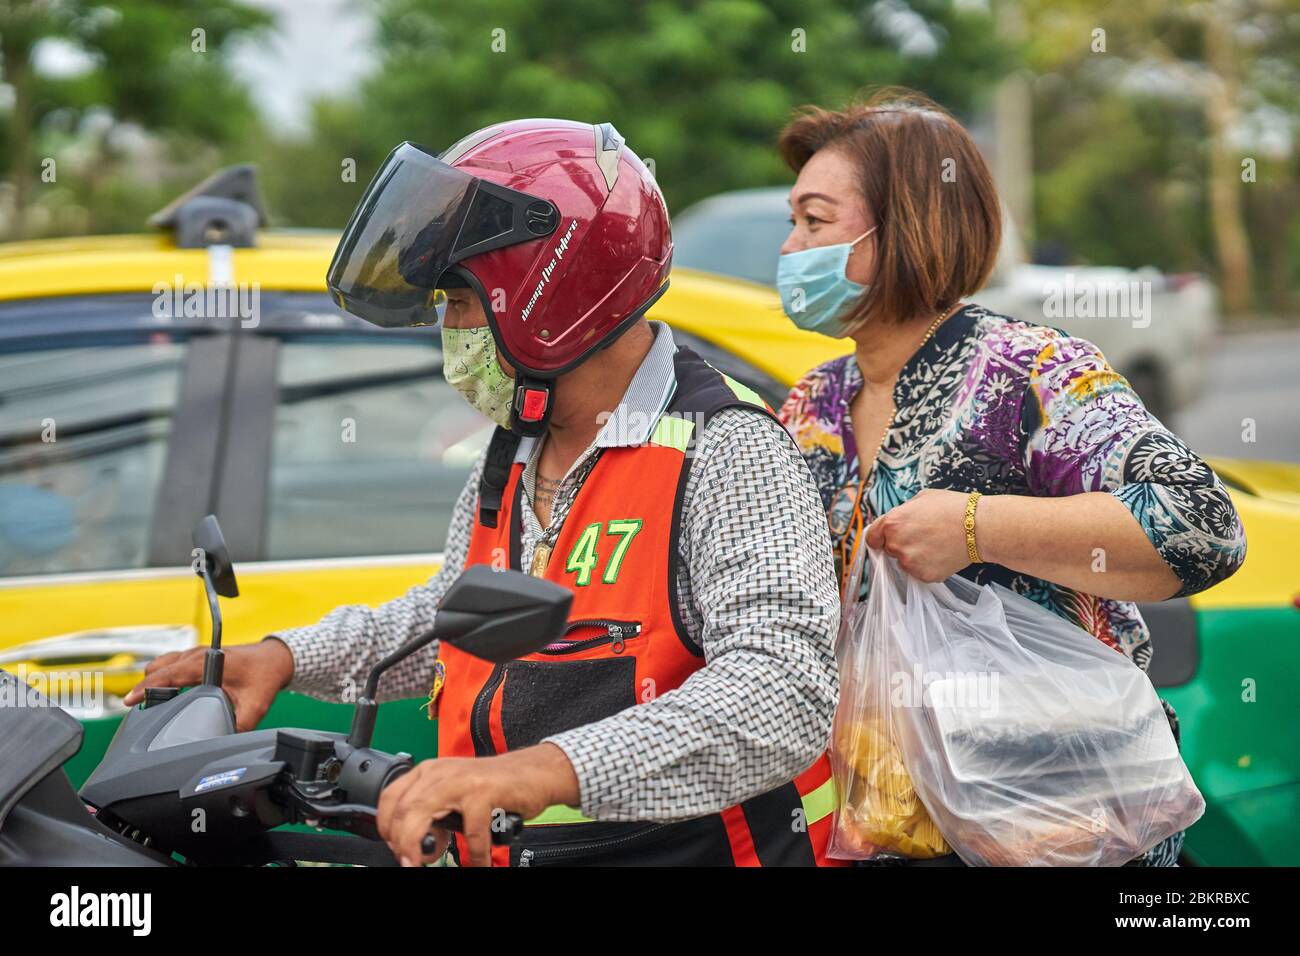 A motorcycle taxi driver and passenger, wearing protective face masks, at Pathumthani, Thailand, in May 2020. Stock Photo